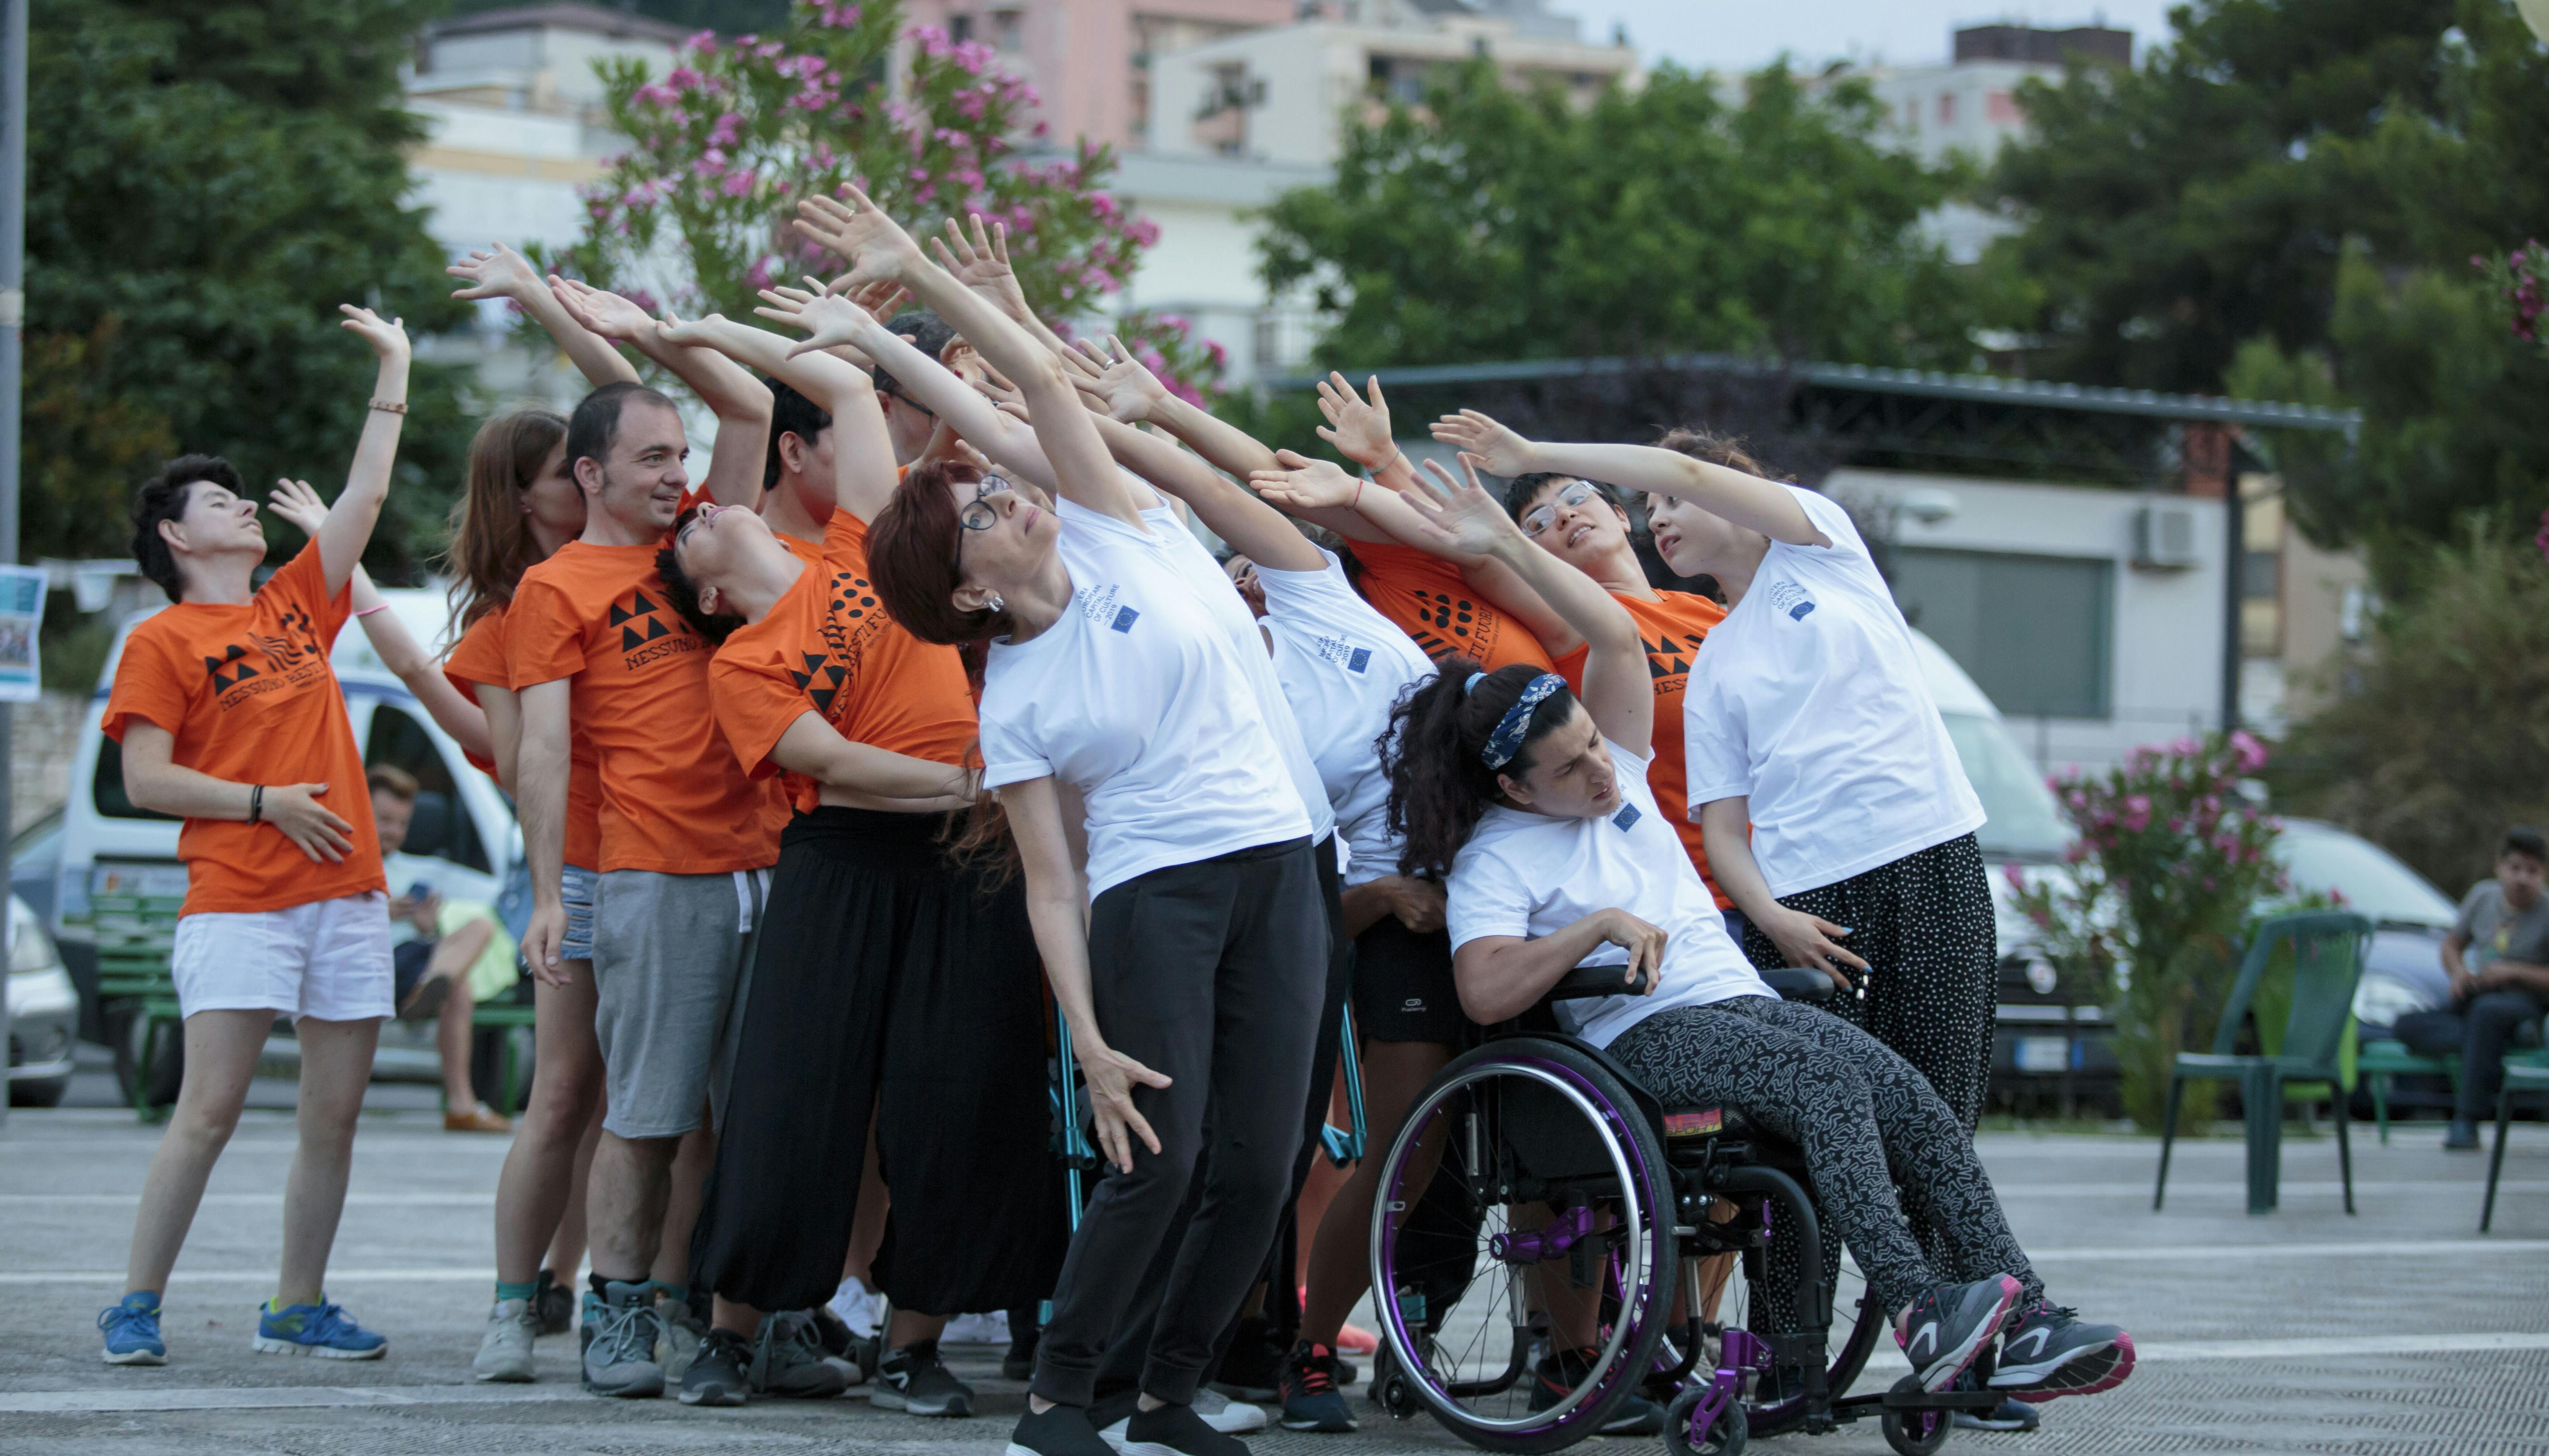 A group of performers with and without disabilities during a performance. They raise one arm upward while slightly tilting their torso back.